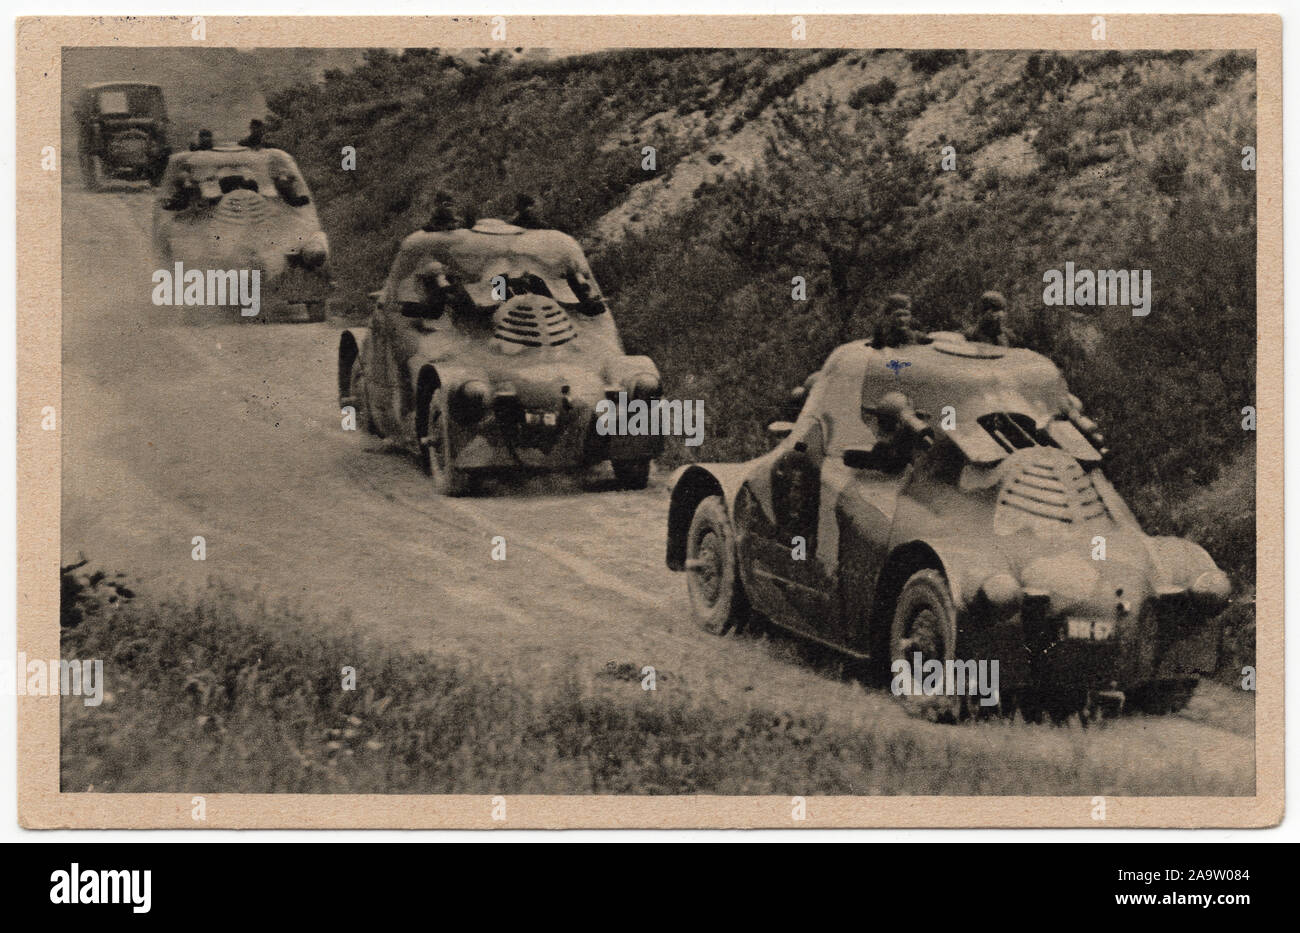 Czechoslovak armoured cars Škoda PA-II Želva (Turtle) depicted in the Czechoslovak vintage postcard issued before 1929. Courtesy of the Azoor Postcard Collection. Stock Photo